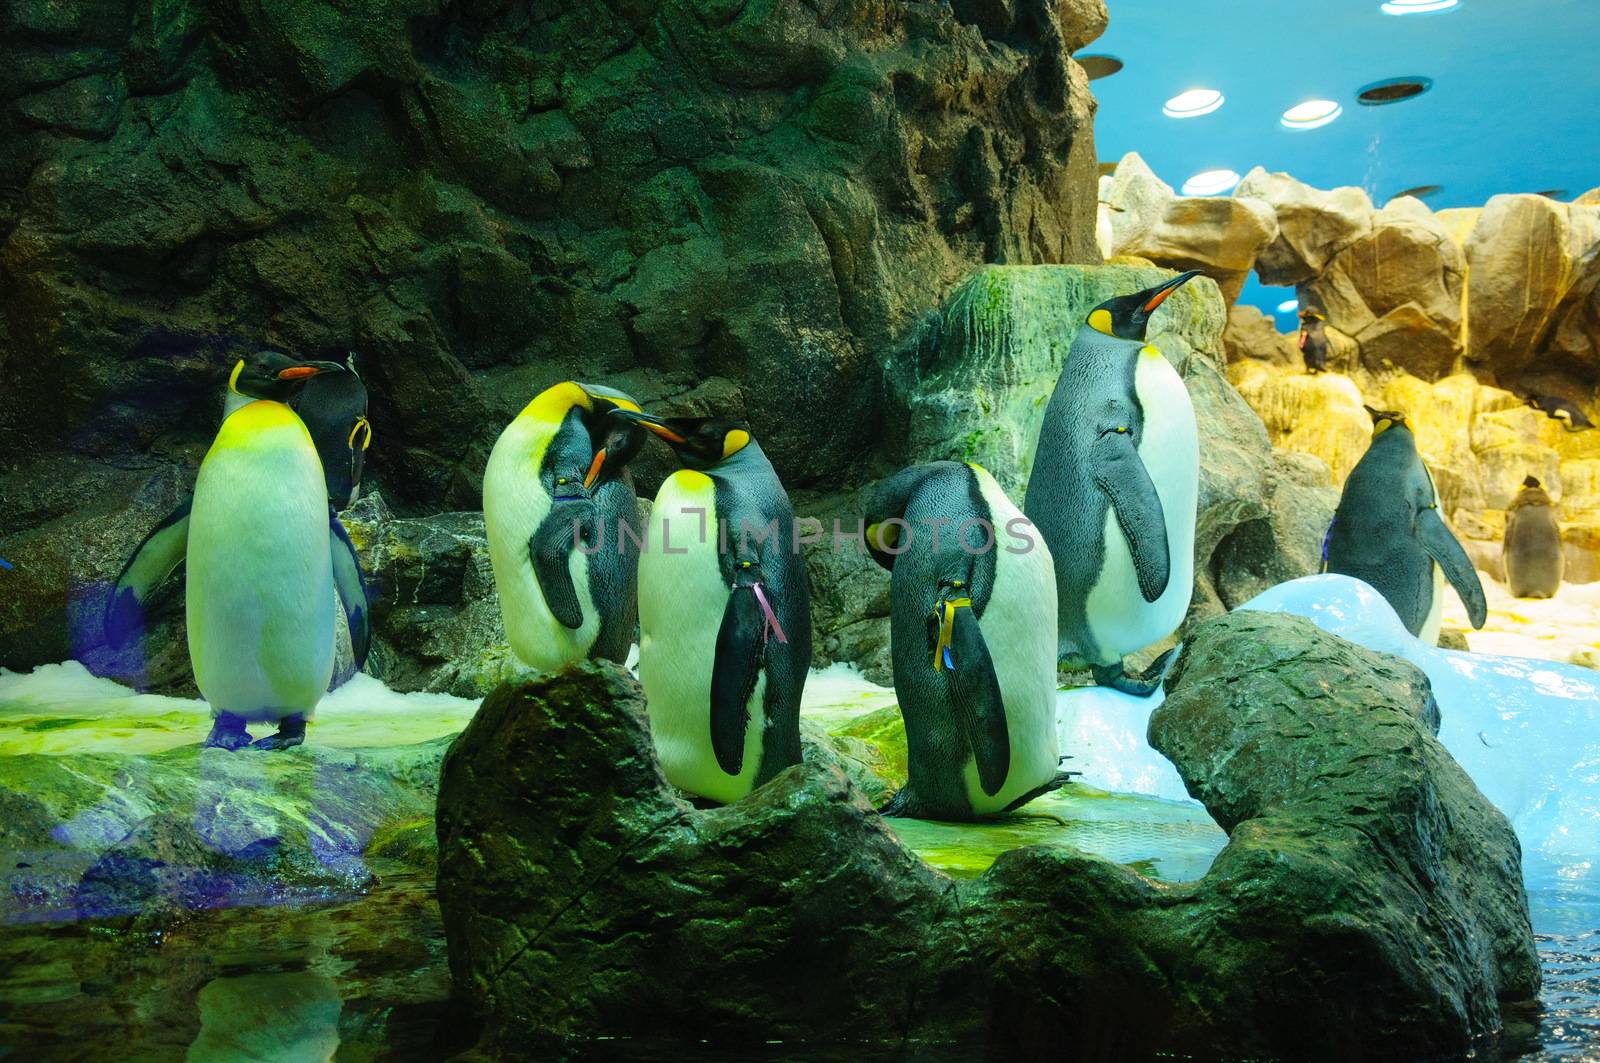 Big King penguins in Loro Parque, Tenerife, Canary Islands. by Eagle2308